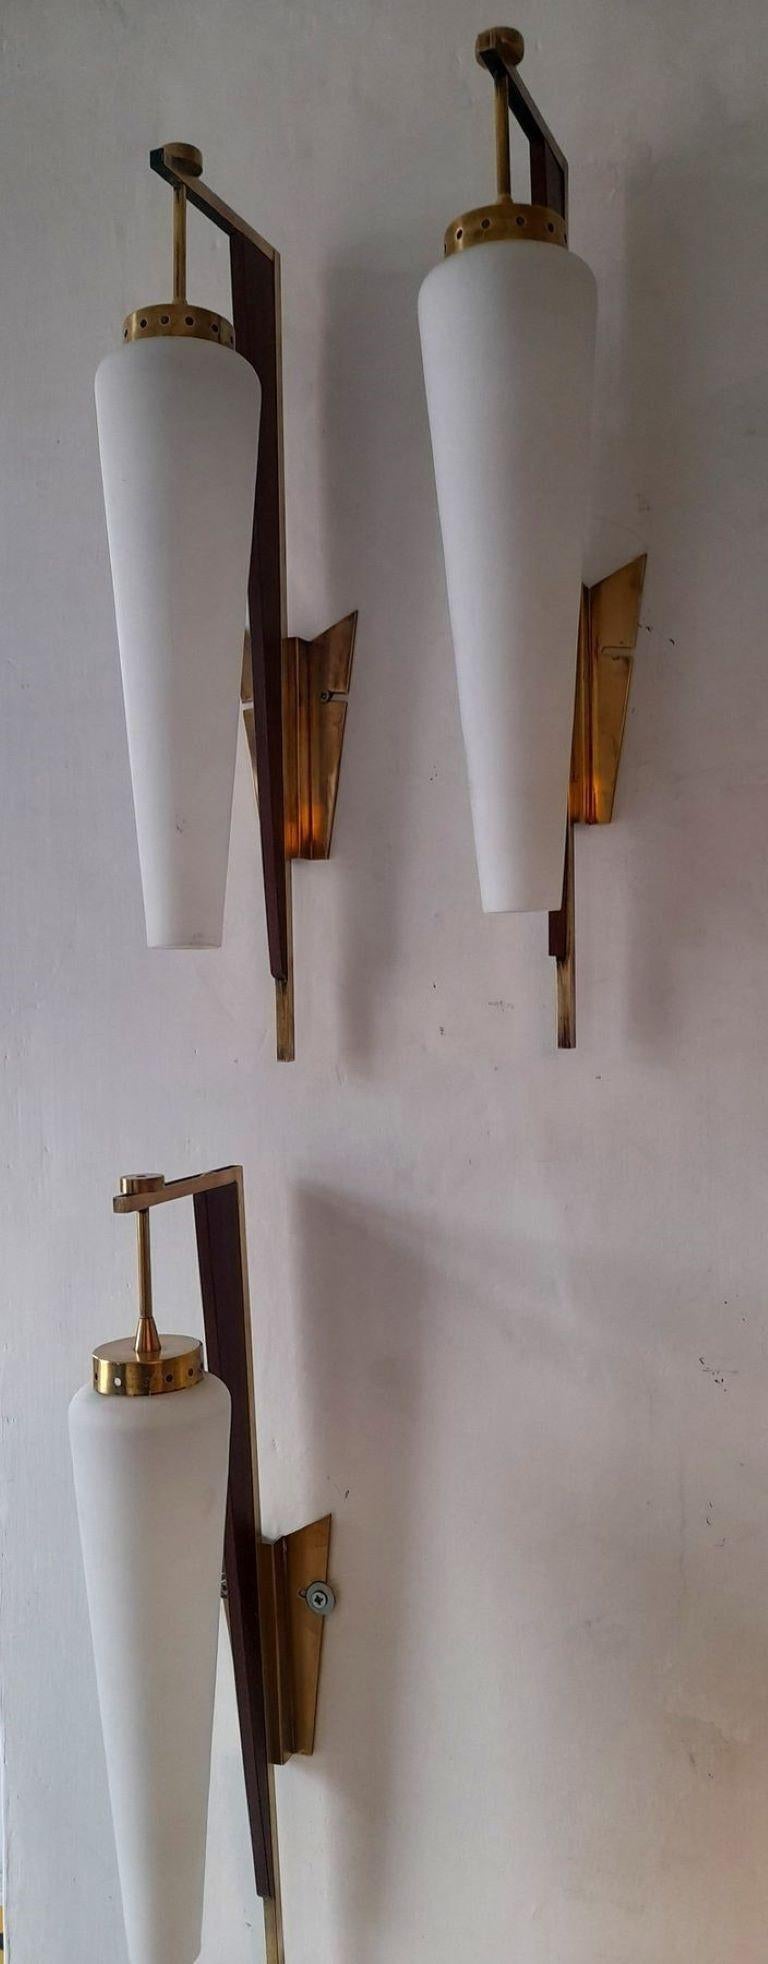 Mid-Century Modern Three Stilnovo Sconces Wall Lights Brass Satin Glass Wood Accents, Italy, 1950s For Sale